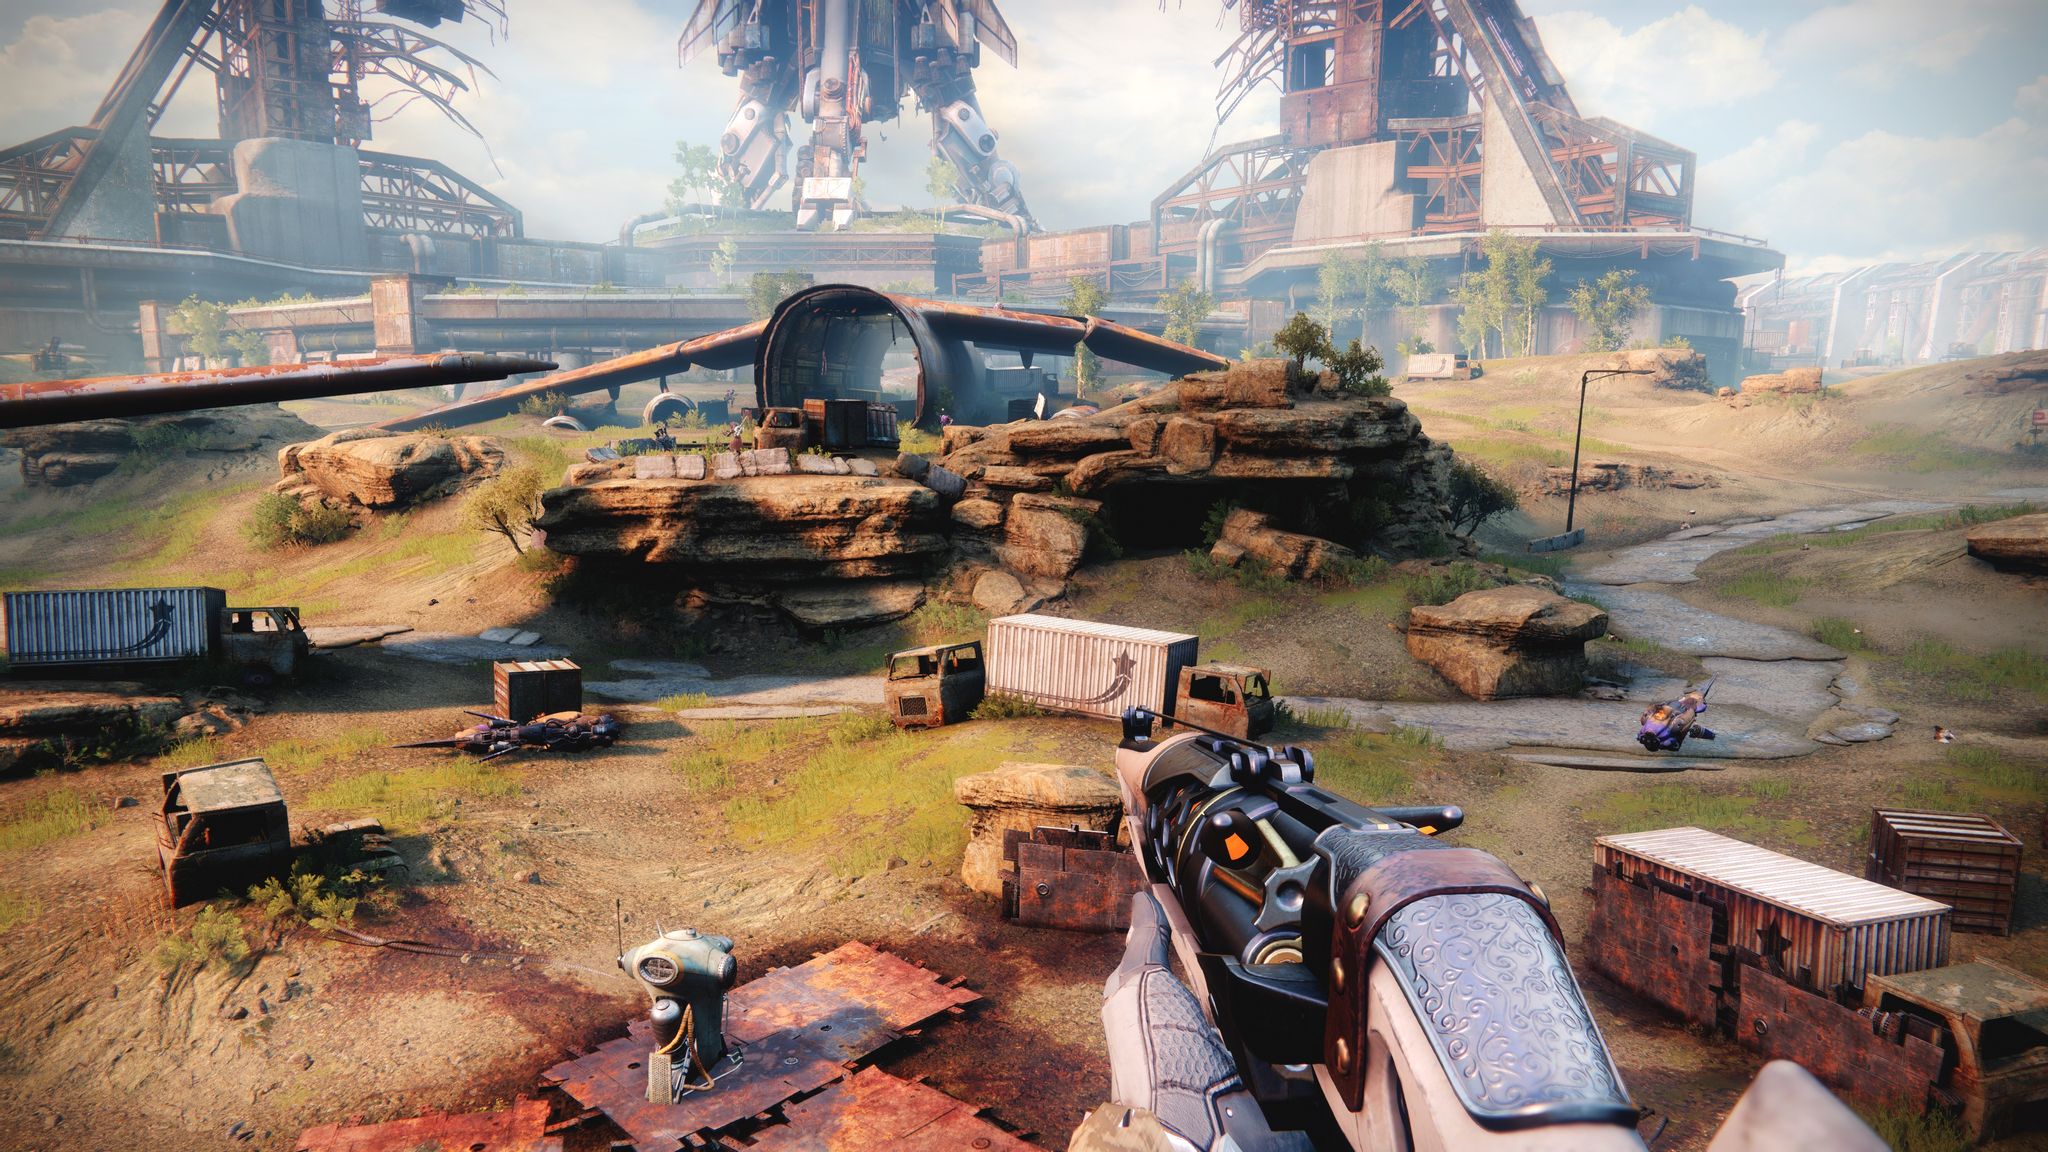 A screenshot from Destiny 2 showing a bunch of rusting metal boxes and a hollowed out shell of a large plane in the distance. The ground is fairly rocky and barren but has more grass and greenery than it used to in Destiny 1.